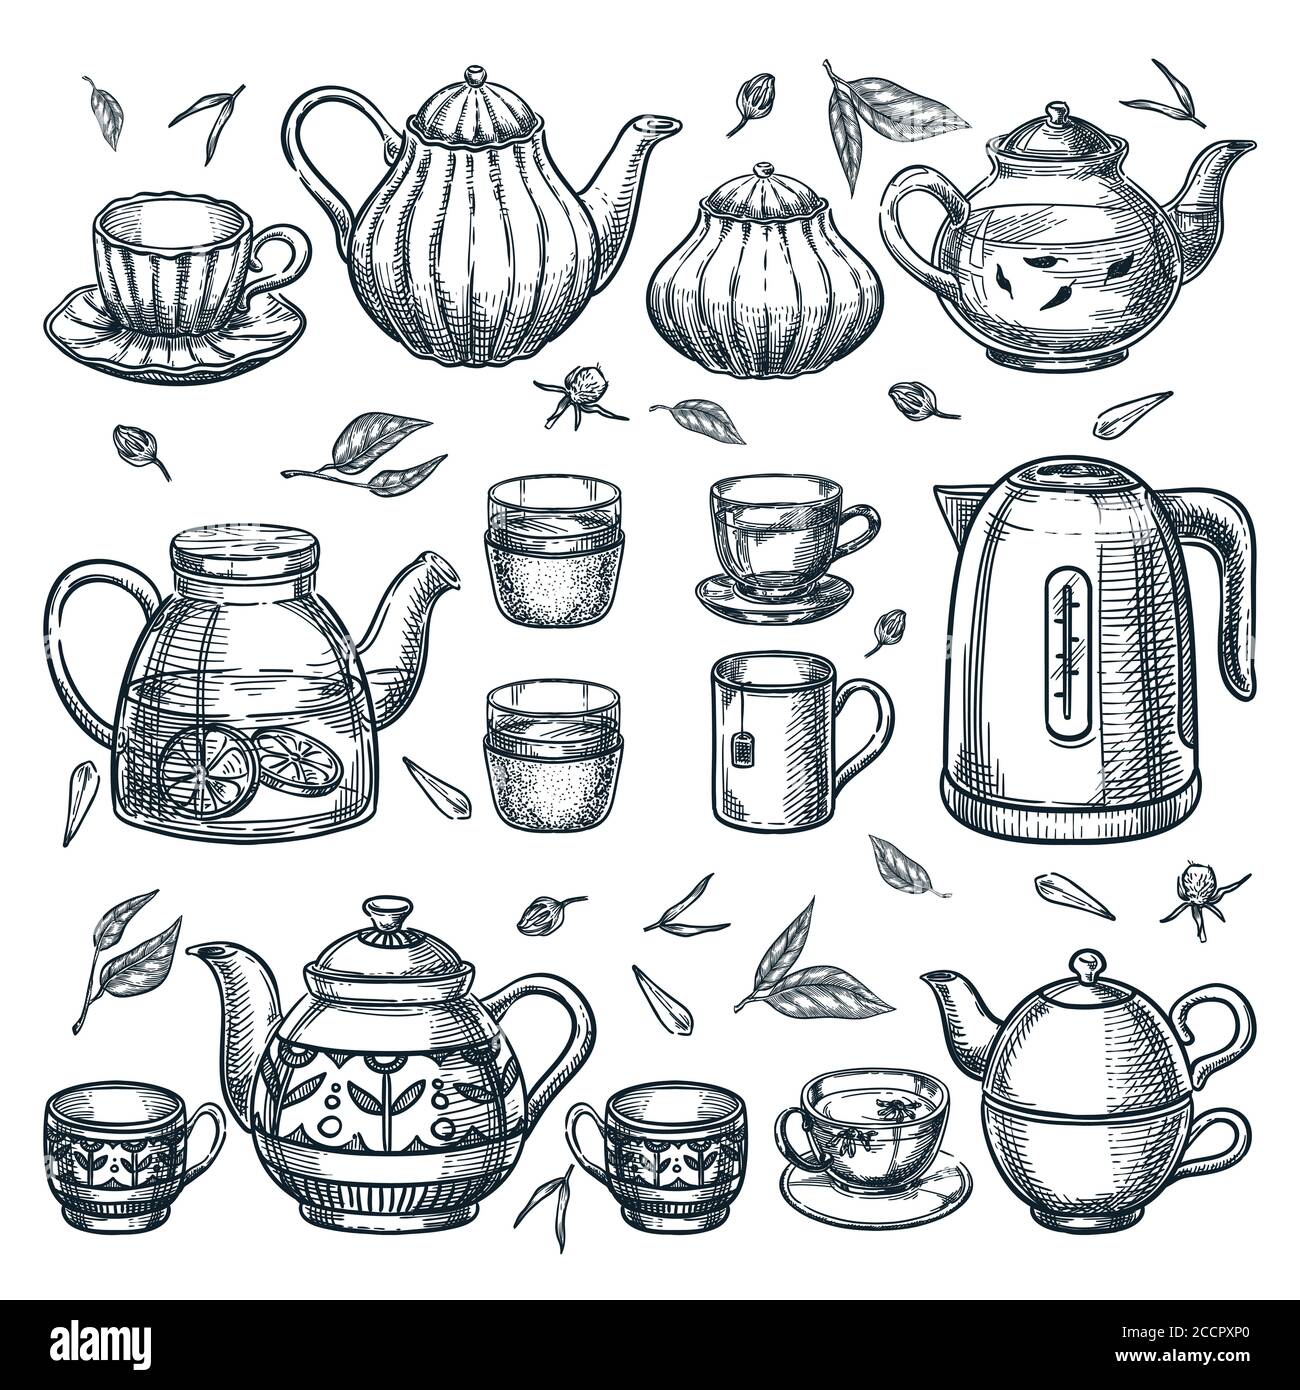 Teapots and tea cups collection. Vector hand drawn sketch illustration. Ceramic, glass, porcelain utensil icons set. Kitchenware and home decoration i Stock Vector